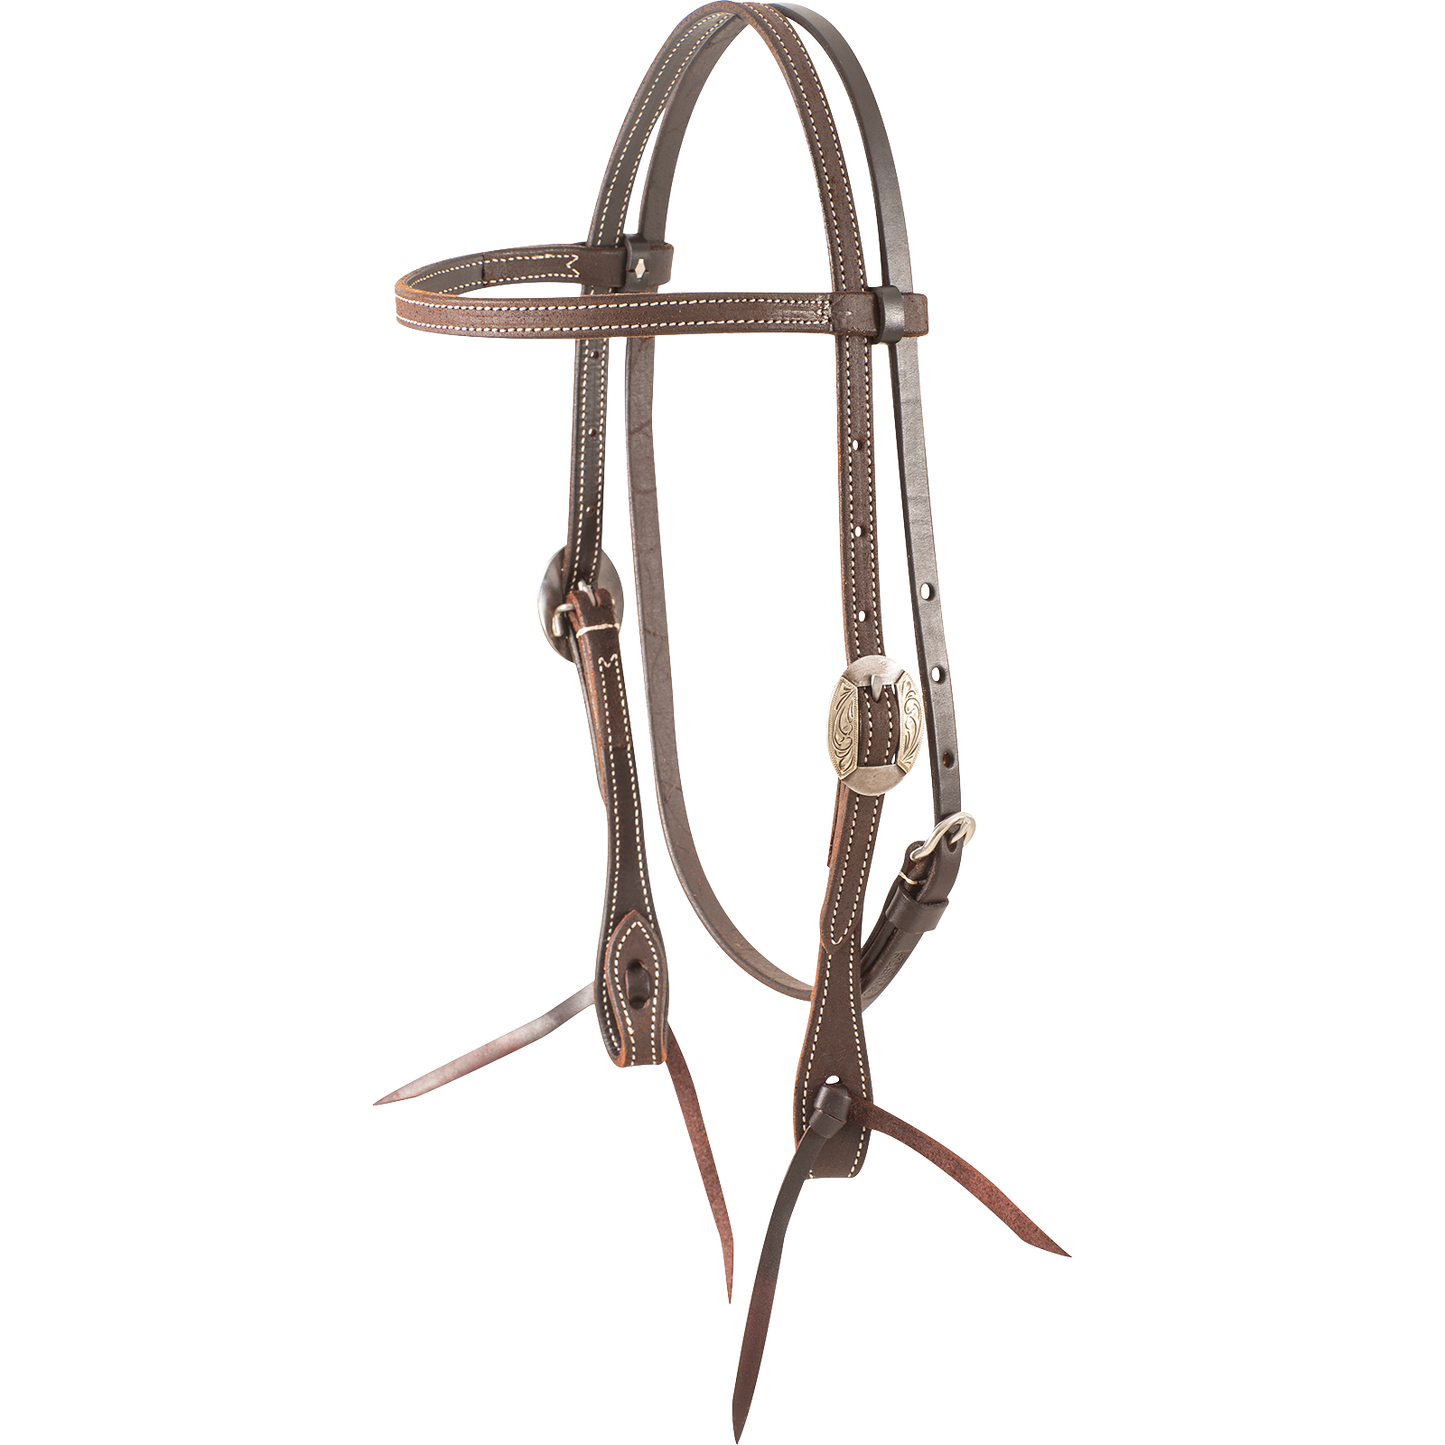 Copia de Headstall #73 - Browband Headstall Clarendon Buckle Chocolate Rougout